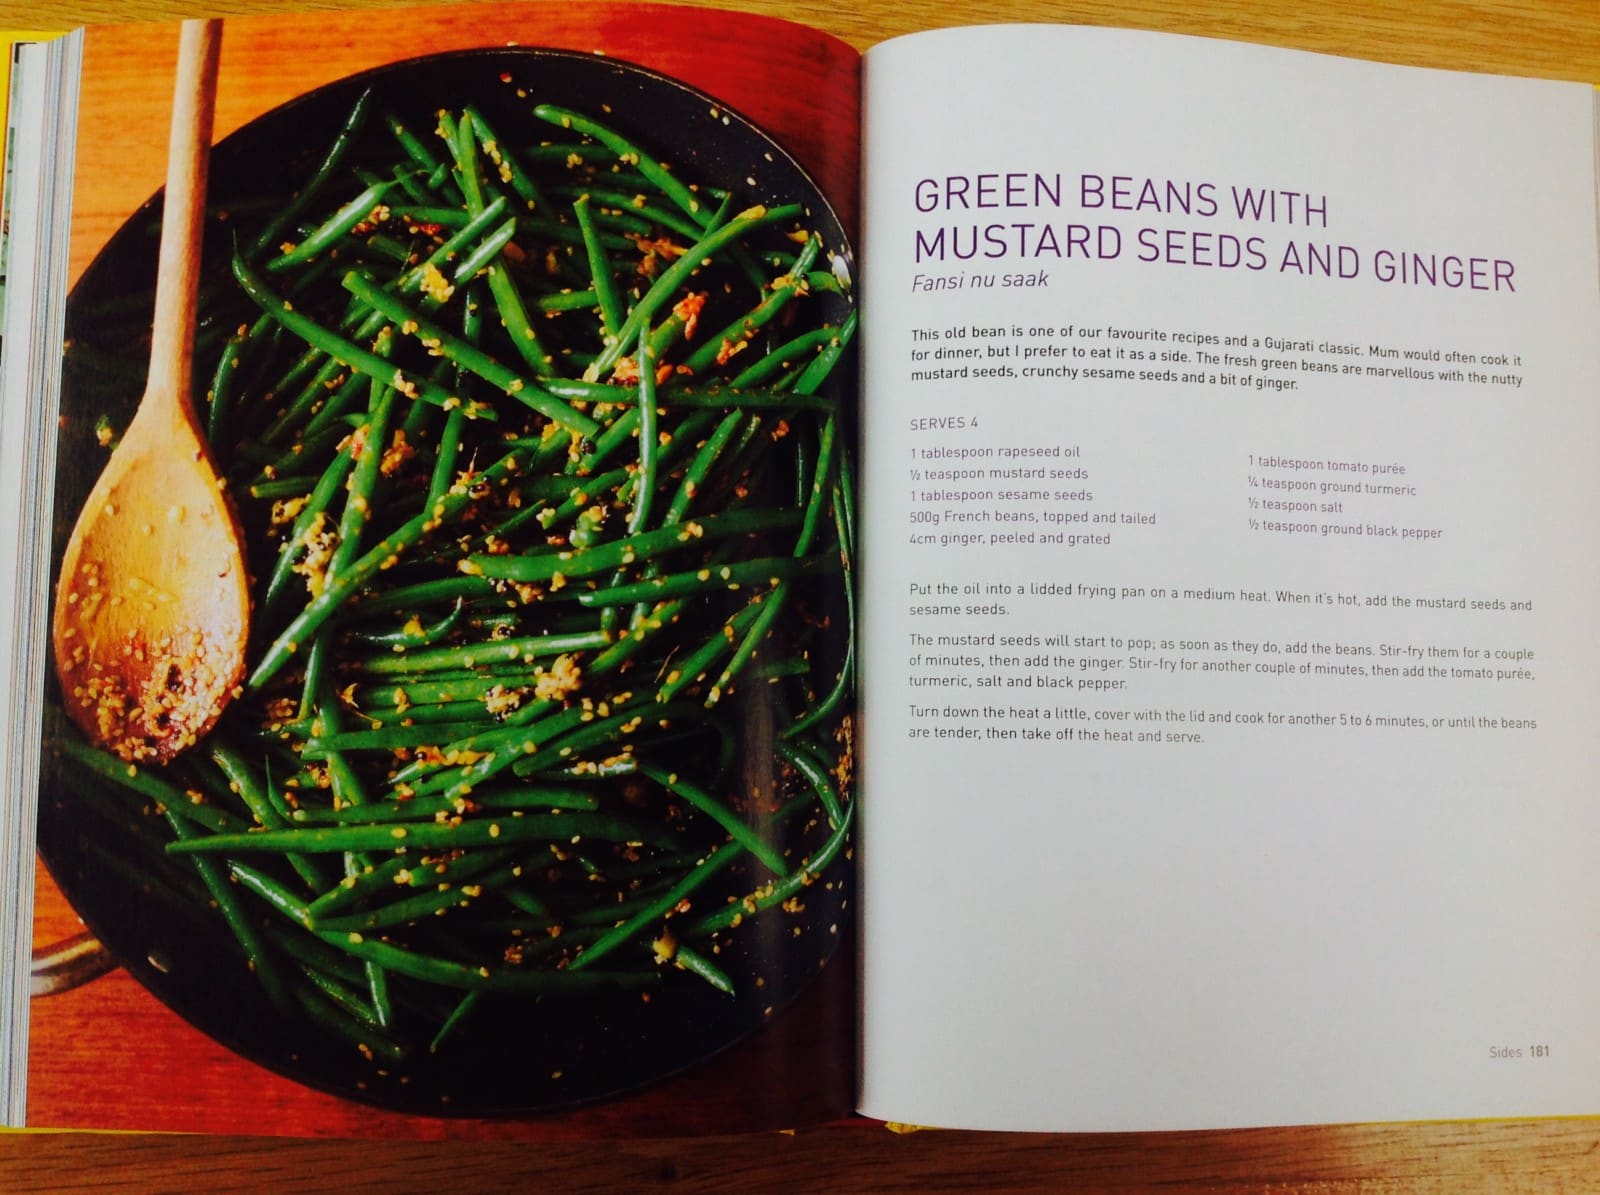 Green beans with mustard seeds